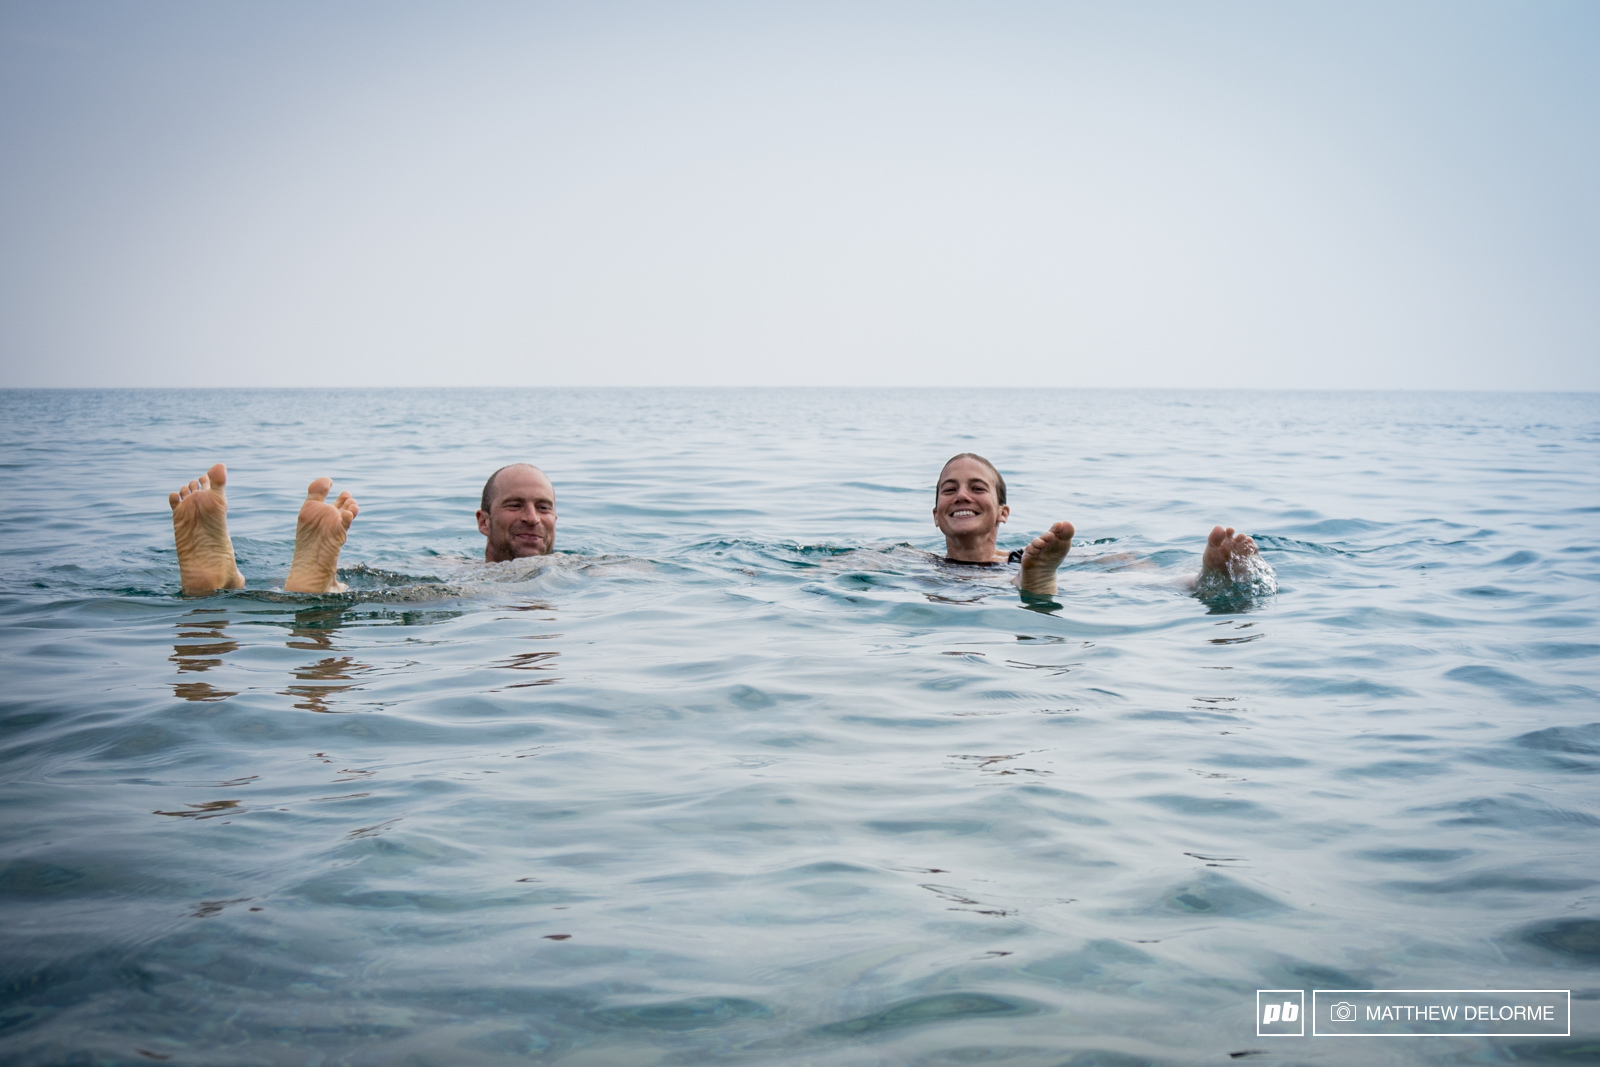 When your pit is just behind the Mediterranean, it's good to wash away the  day with a refreshing swim.